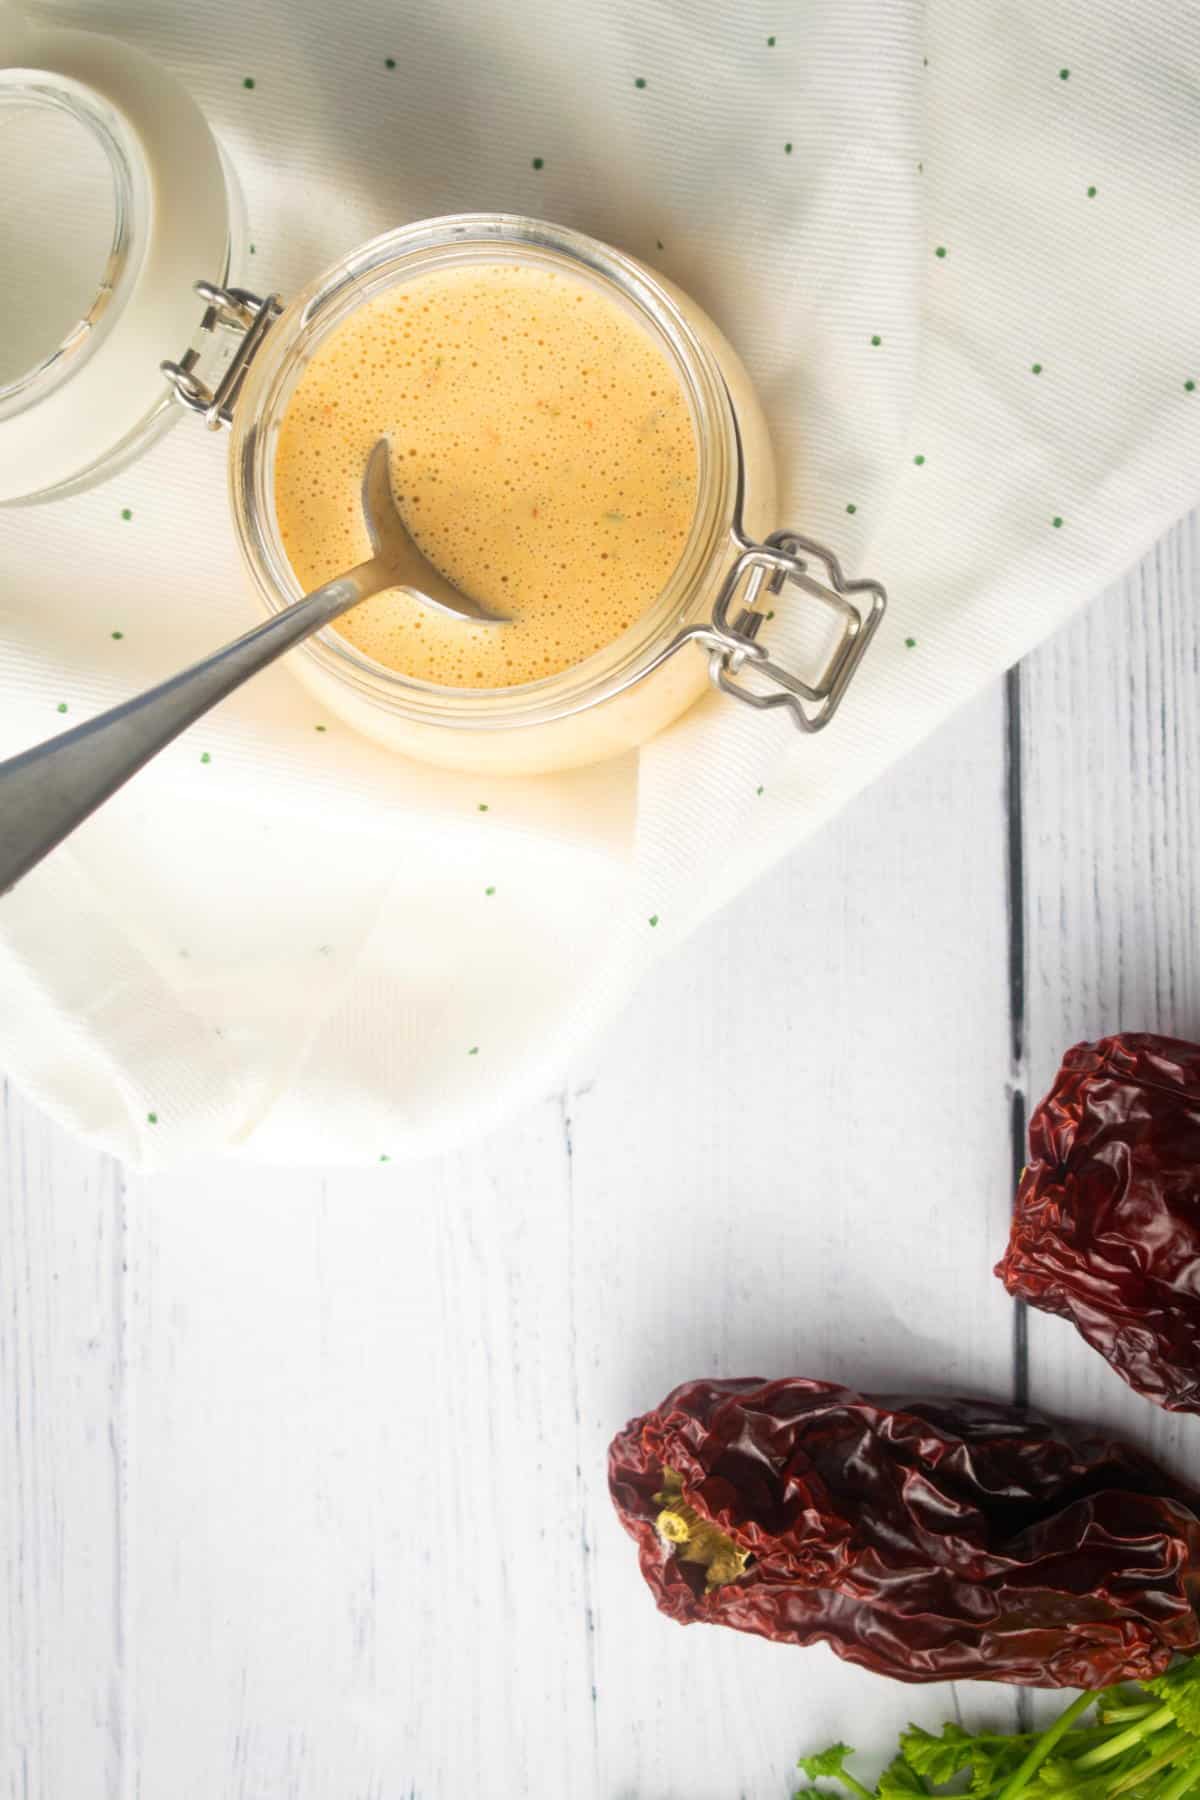 Chipotle sauce in a jar with a spoon, top view, on white wooden background. Chipotle peppers on the side.